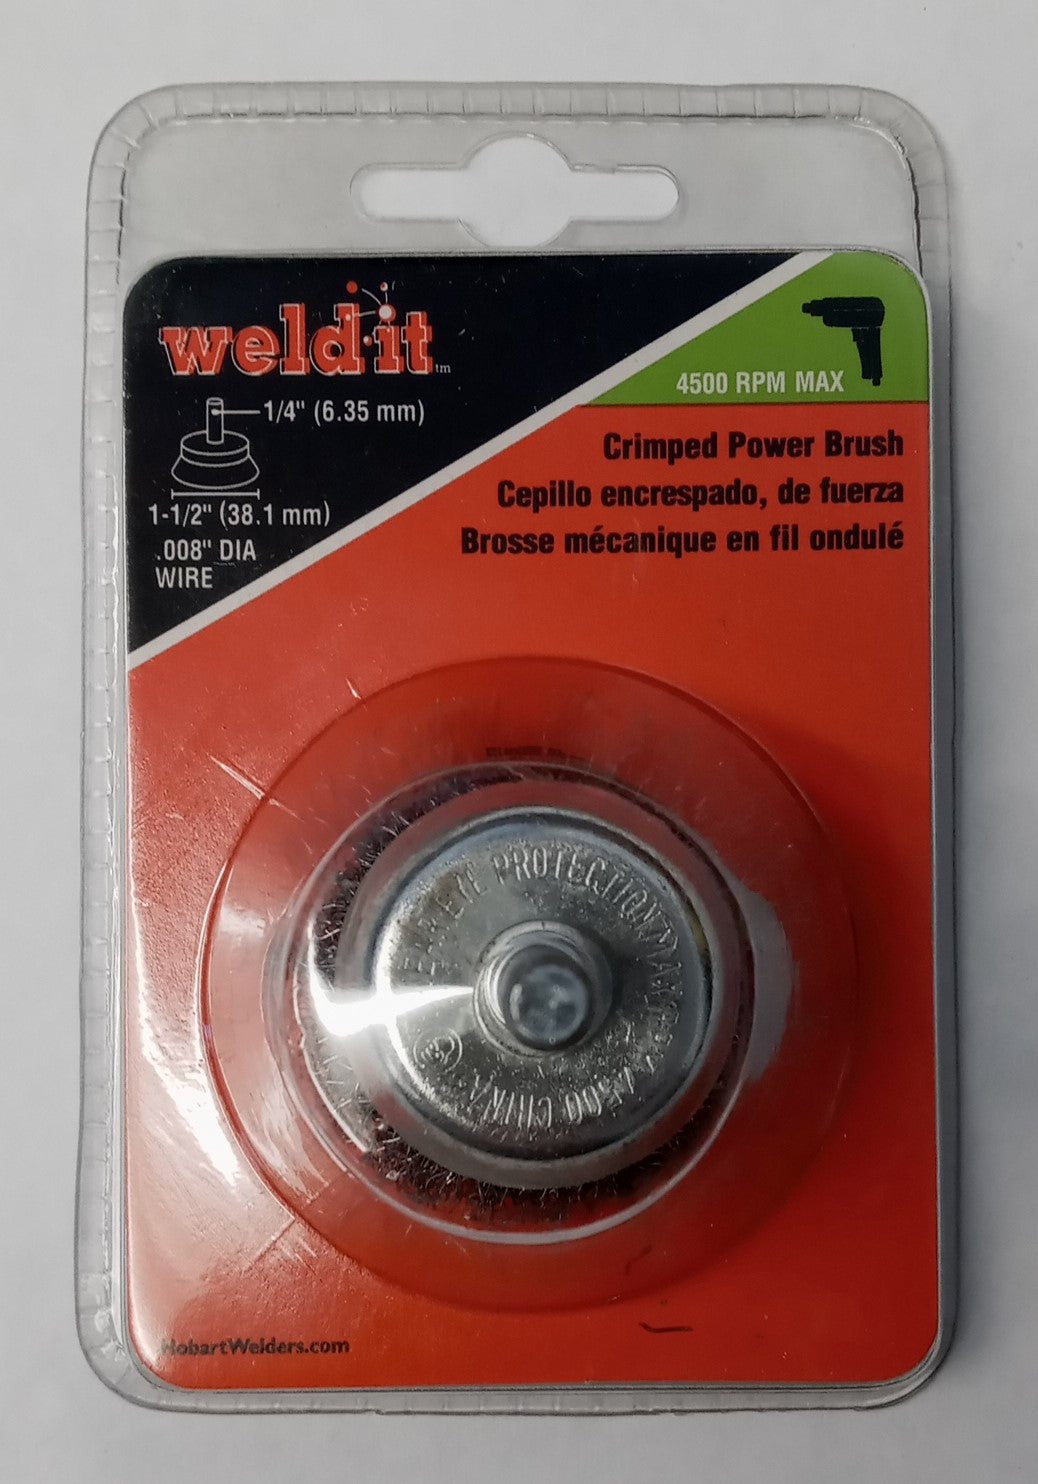 Hobart 770395  1-1/2"" Crimped Crimped Power Brush .008" Wire